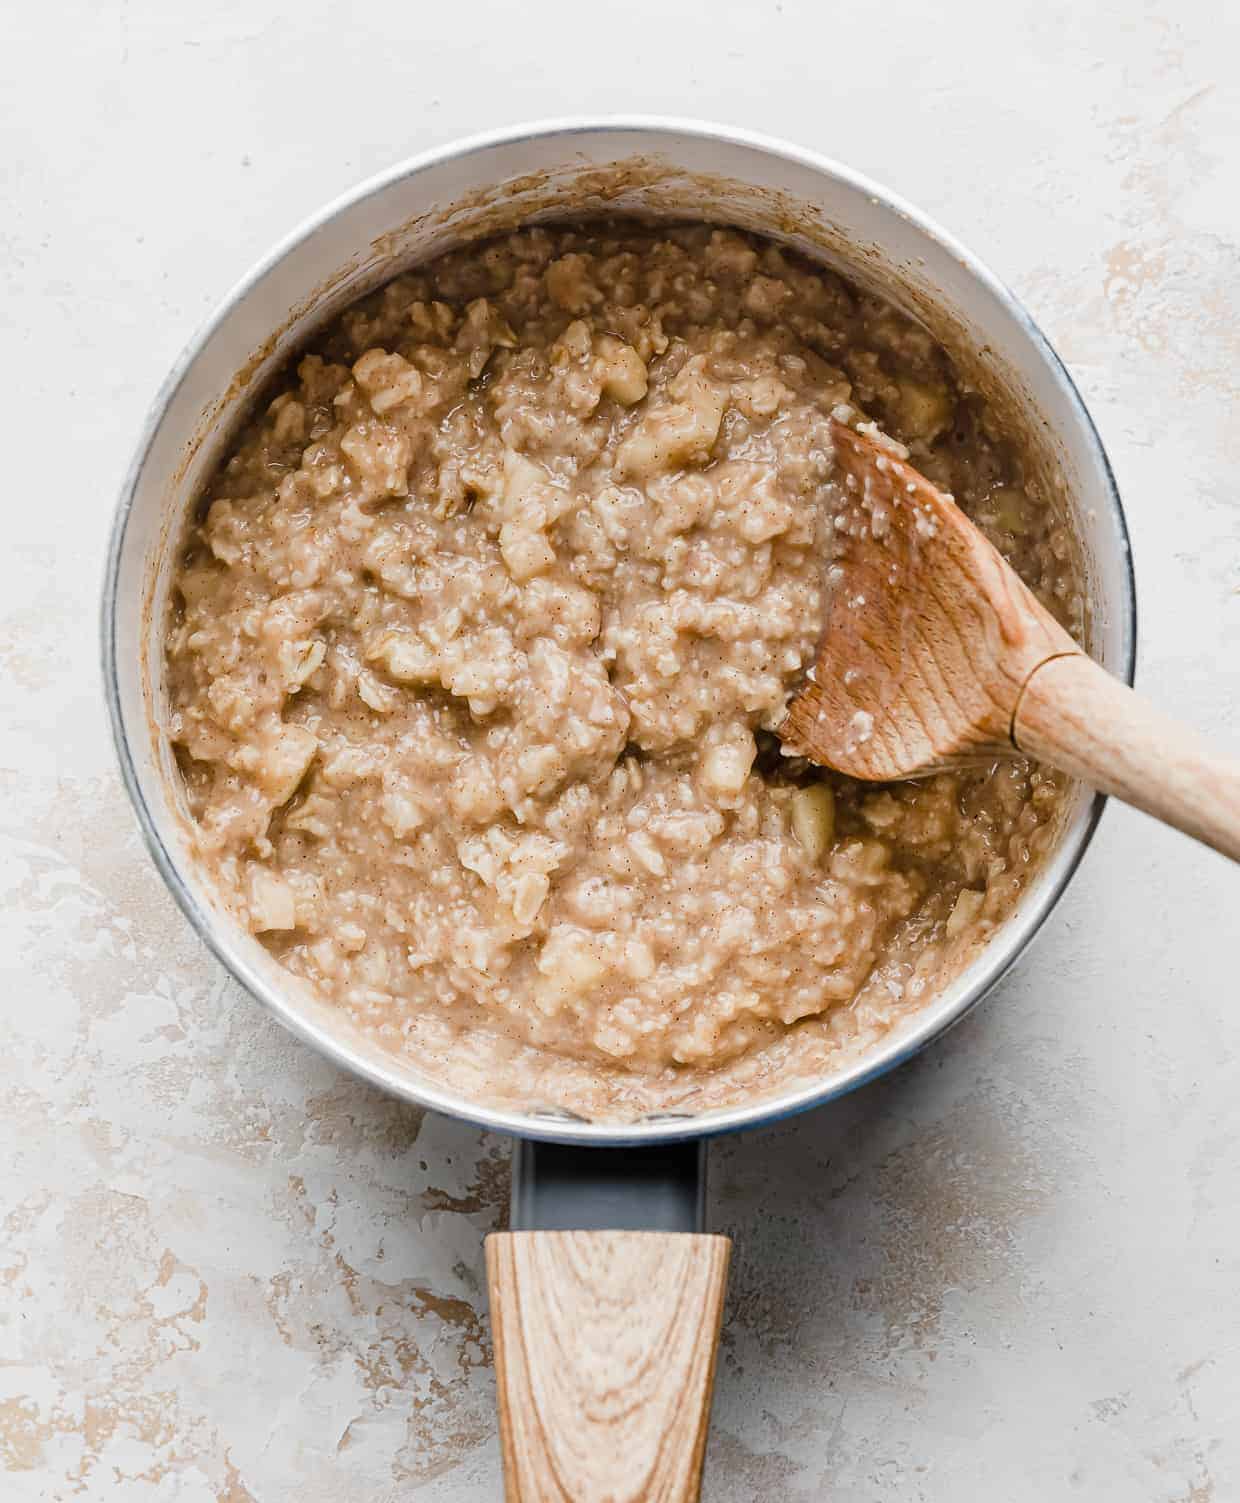 A wooden spoon inside a white pot full of cooked Apple Cinnamon Oatmeal.